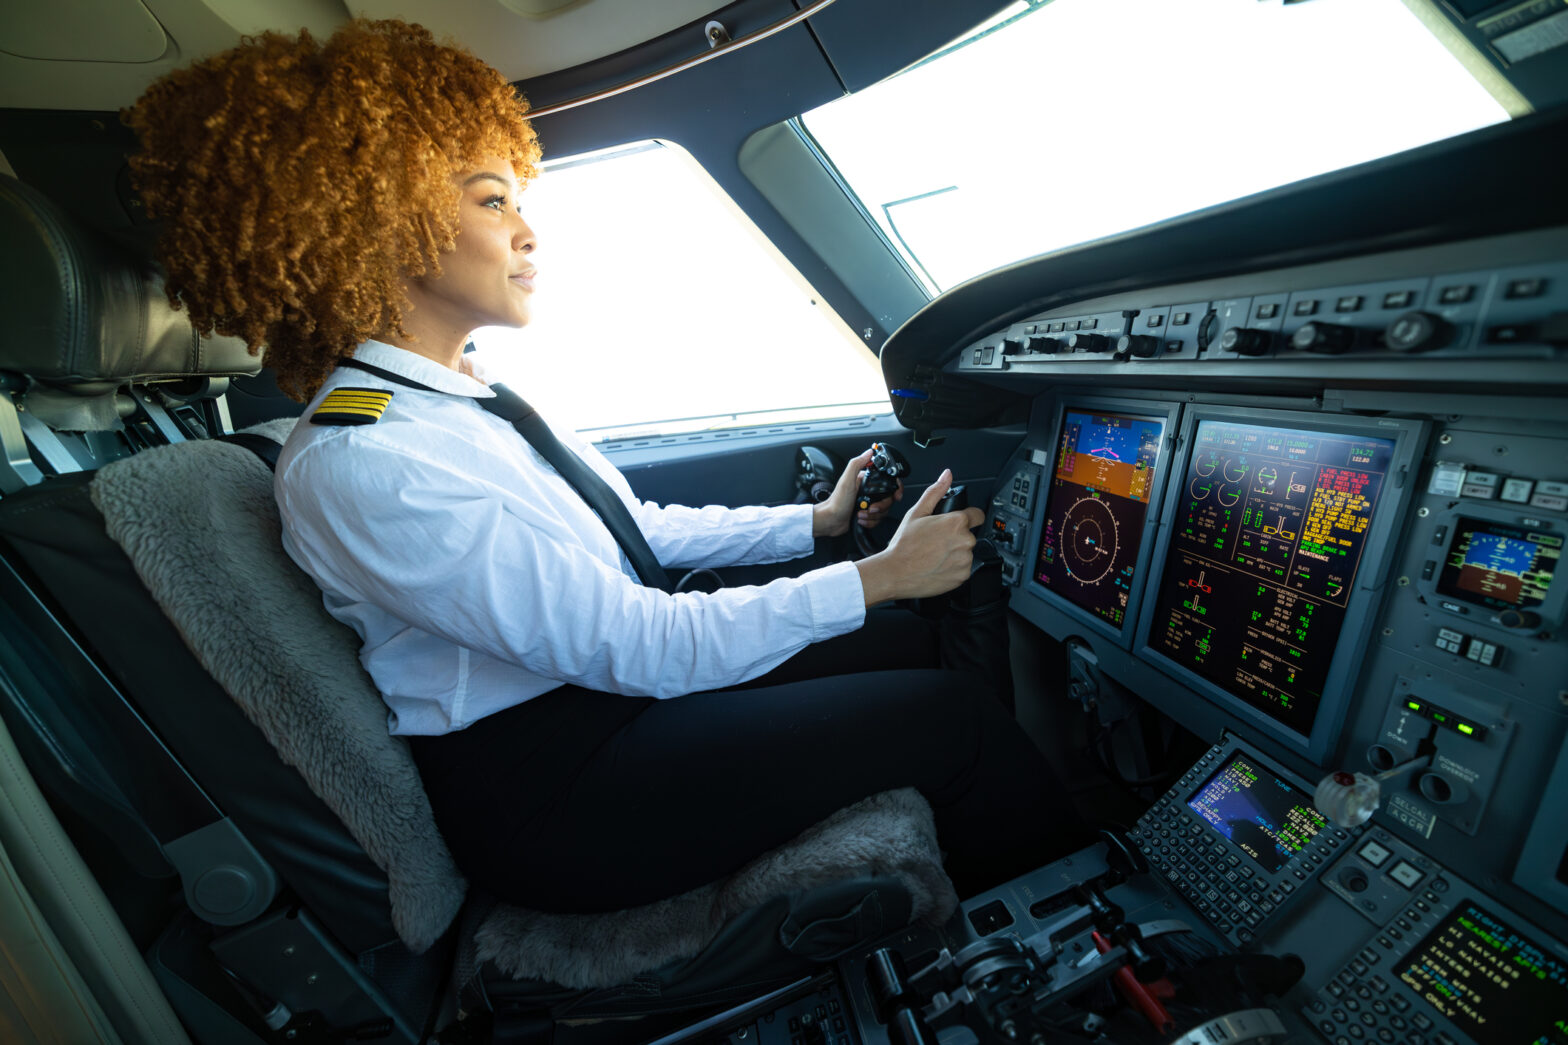 17-Year-Old, Kamora Freeland, Becomes One Of The Country's Youngest Black Pilots